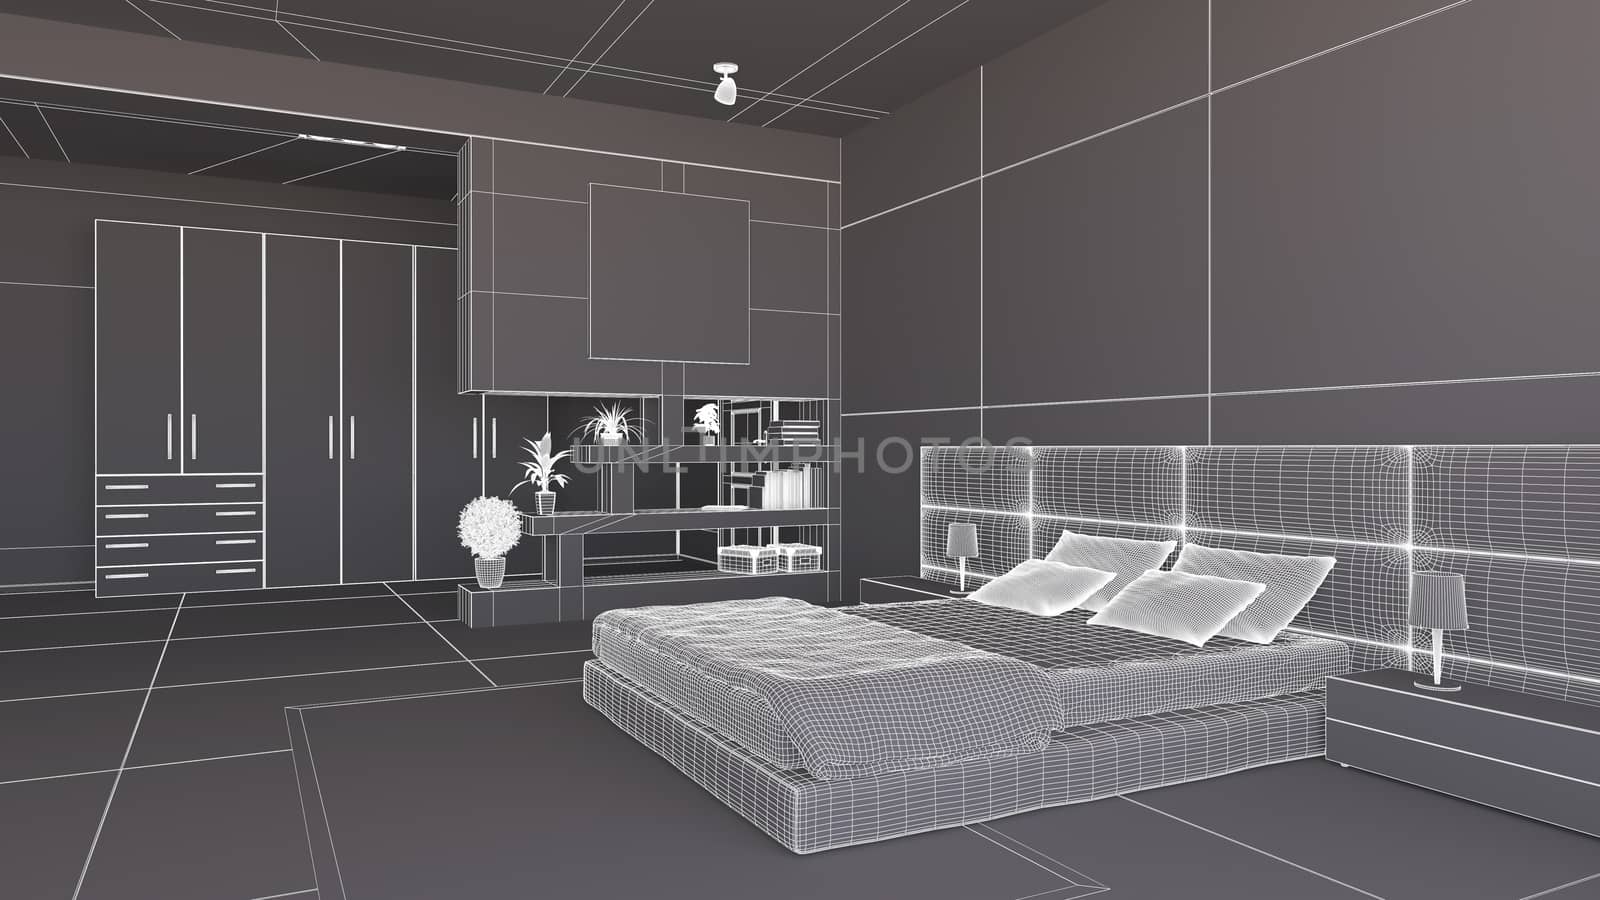 Interior render of a bedroom with some furinitures by enrico.lapponi